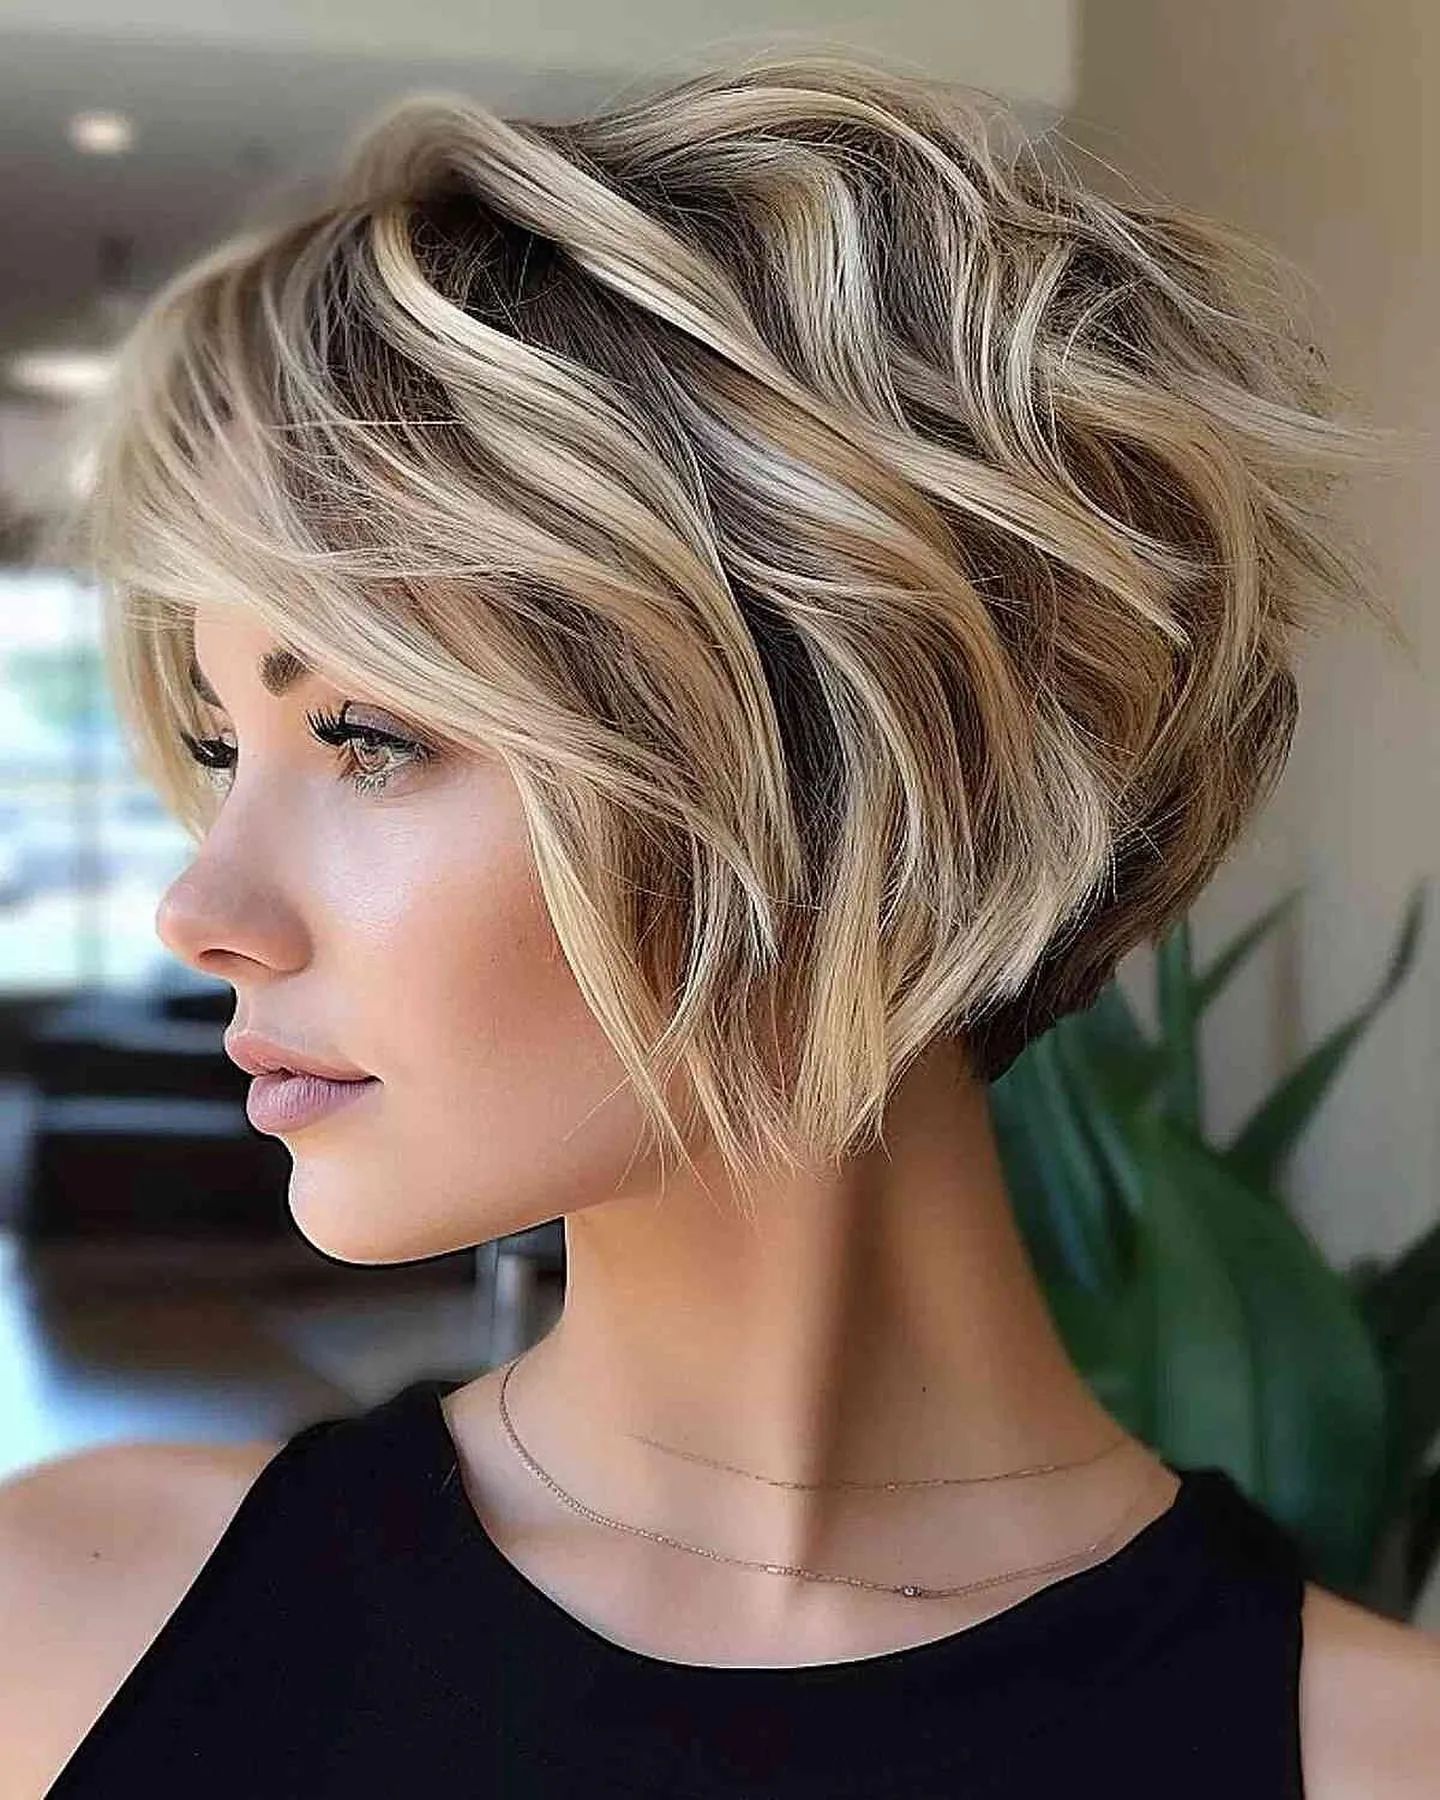 Chic Short Hairstyles for Fine Hair That Add Volume and Texture